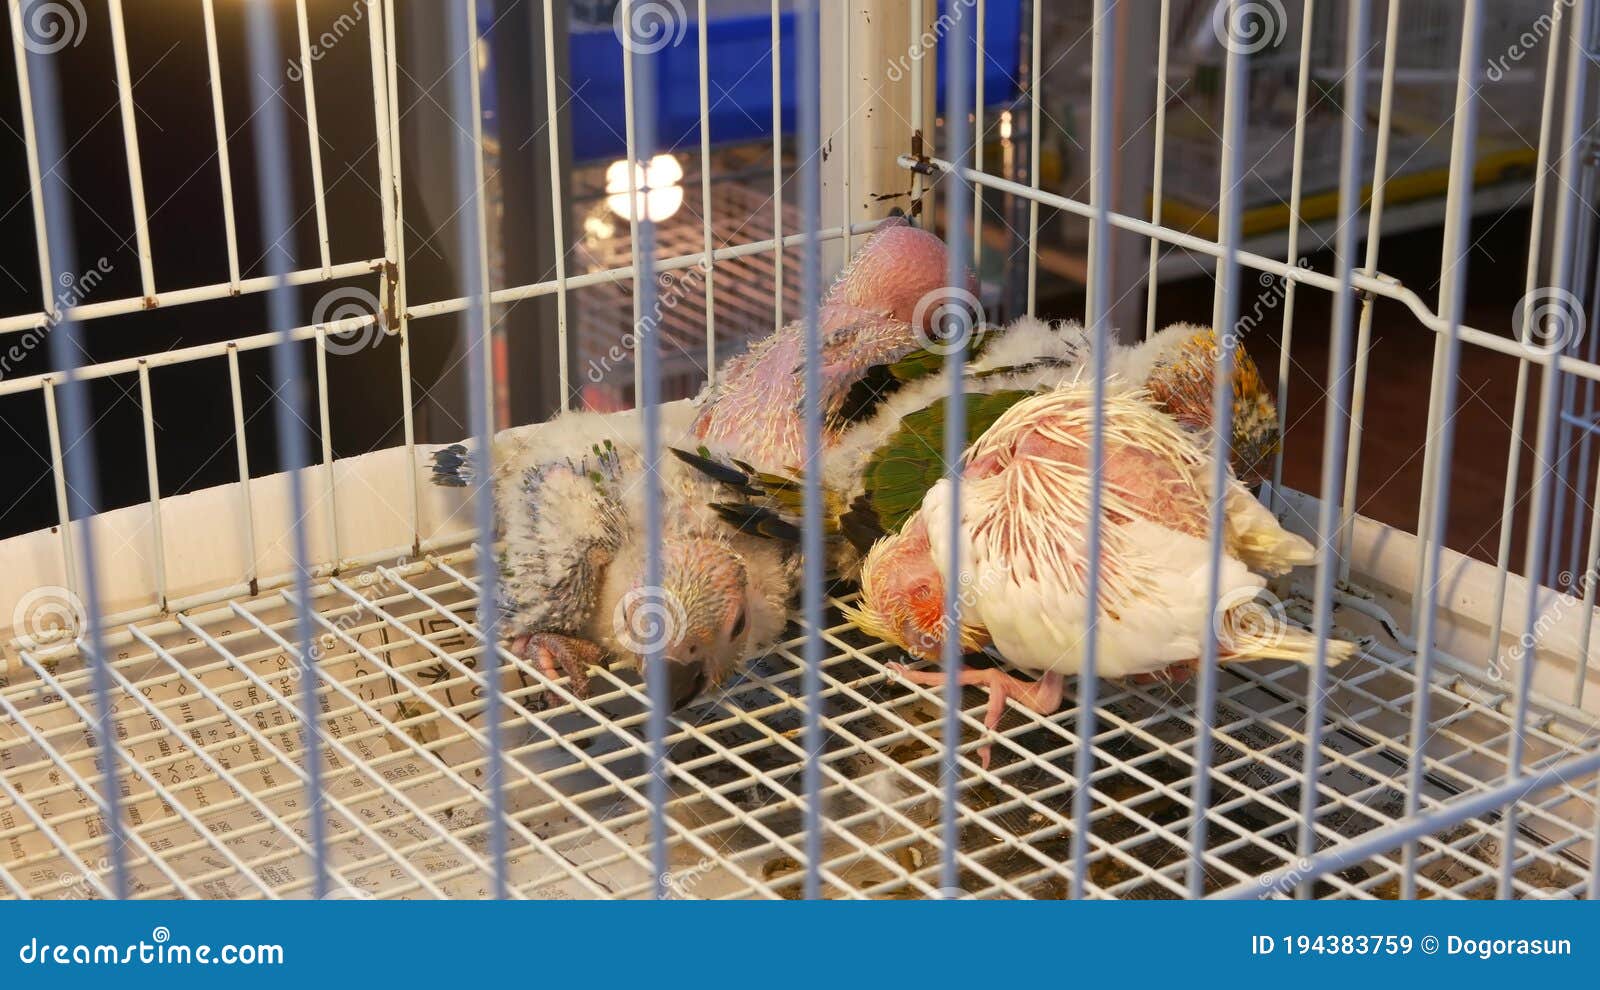 Parrot Chicks in Cages on Pet Market. from Above Birds Being Kept in Small  Cage on Chatuchak Market in Bangkok, Thailand Stock Image - Image of catch,  ornithology: 194383759